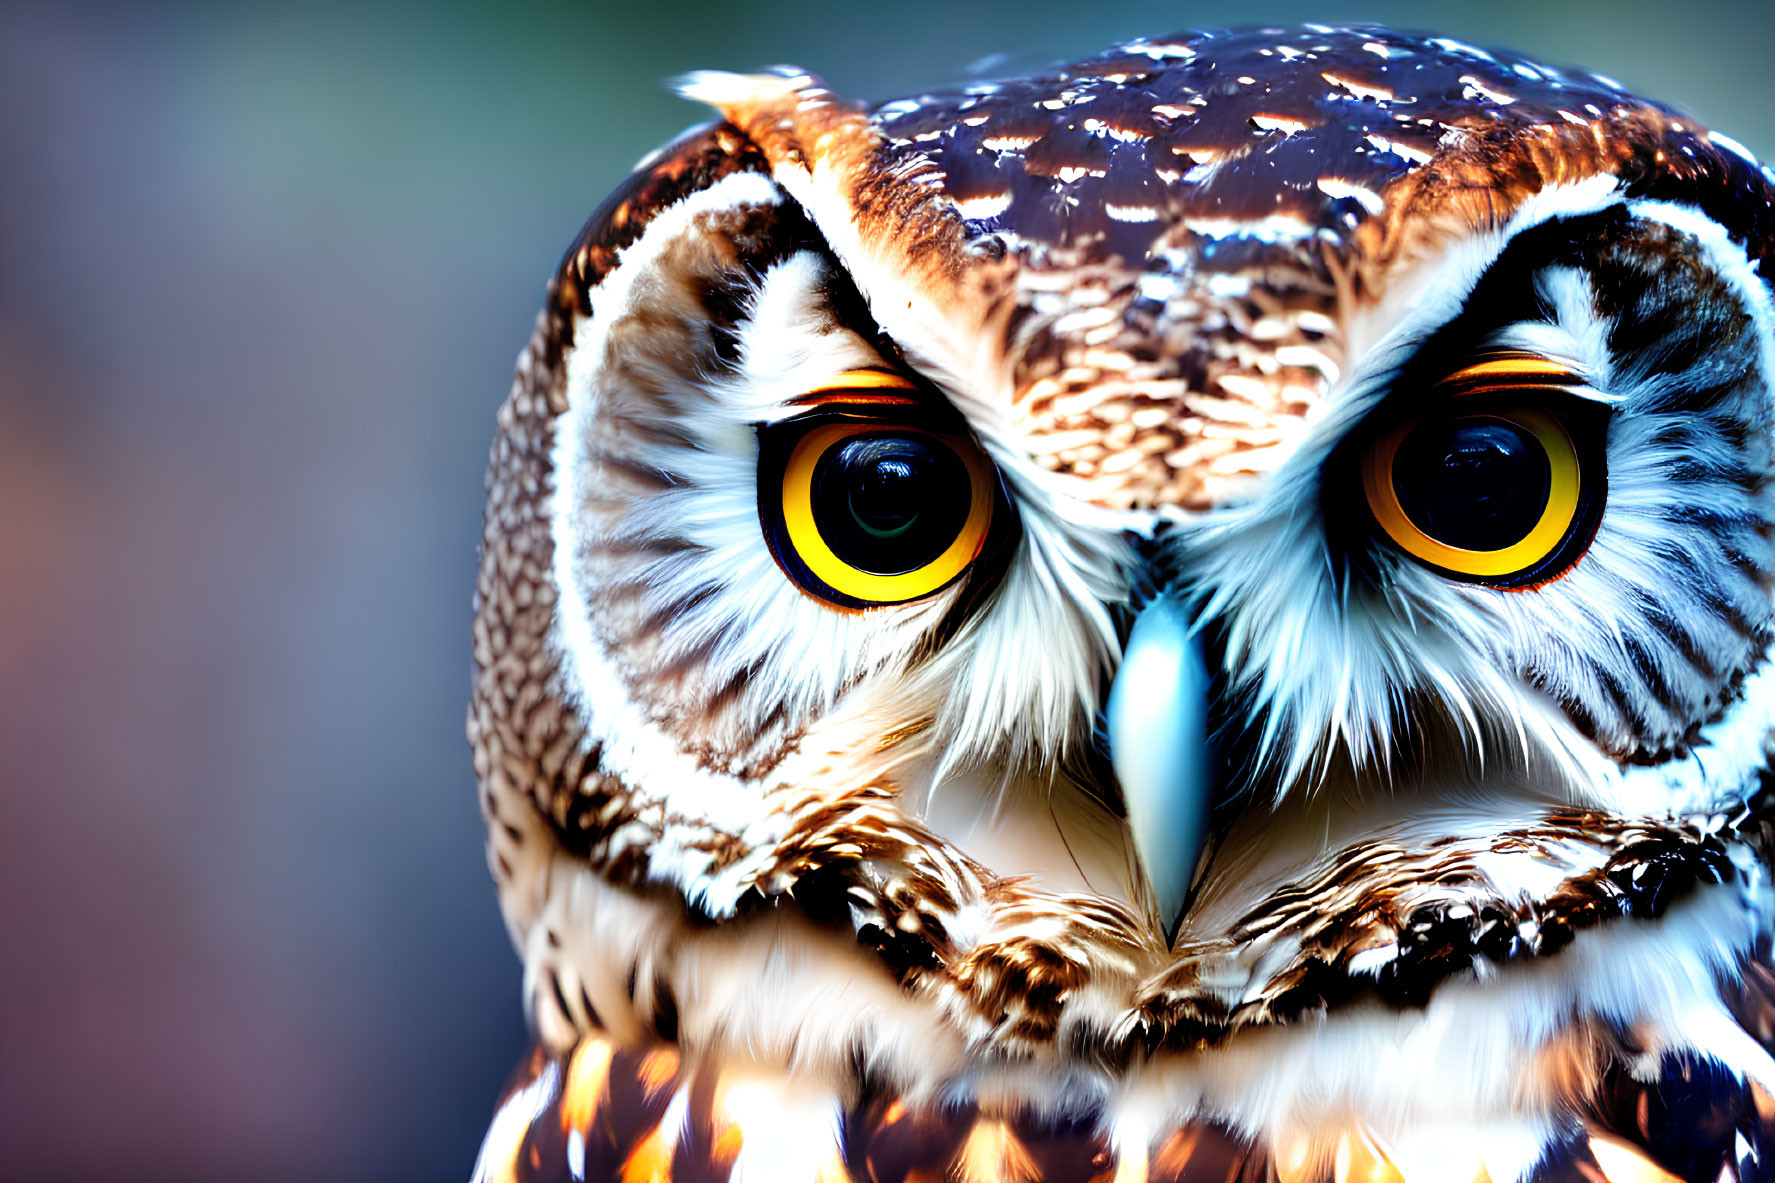 Detailed Close-up of Owl with Intense Yellow Eyes and Brown & White Feathers